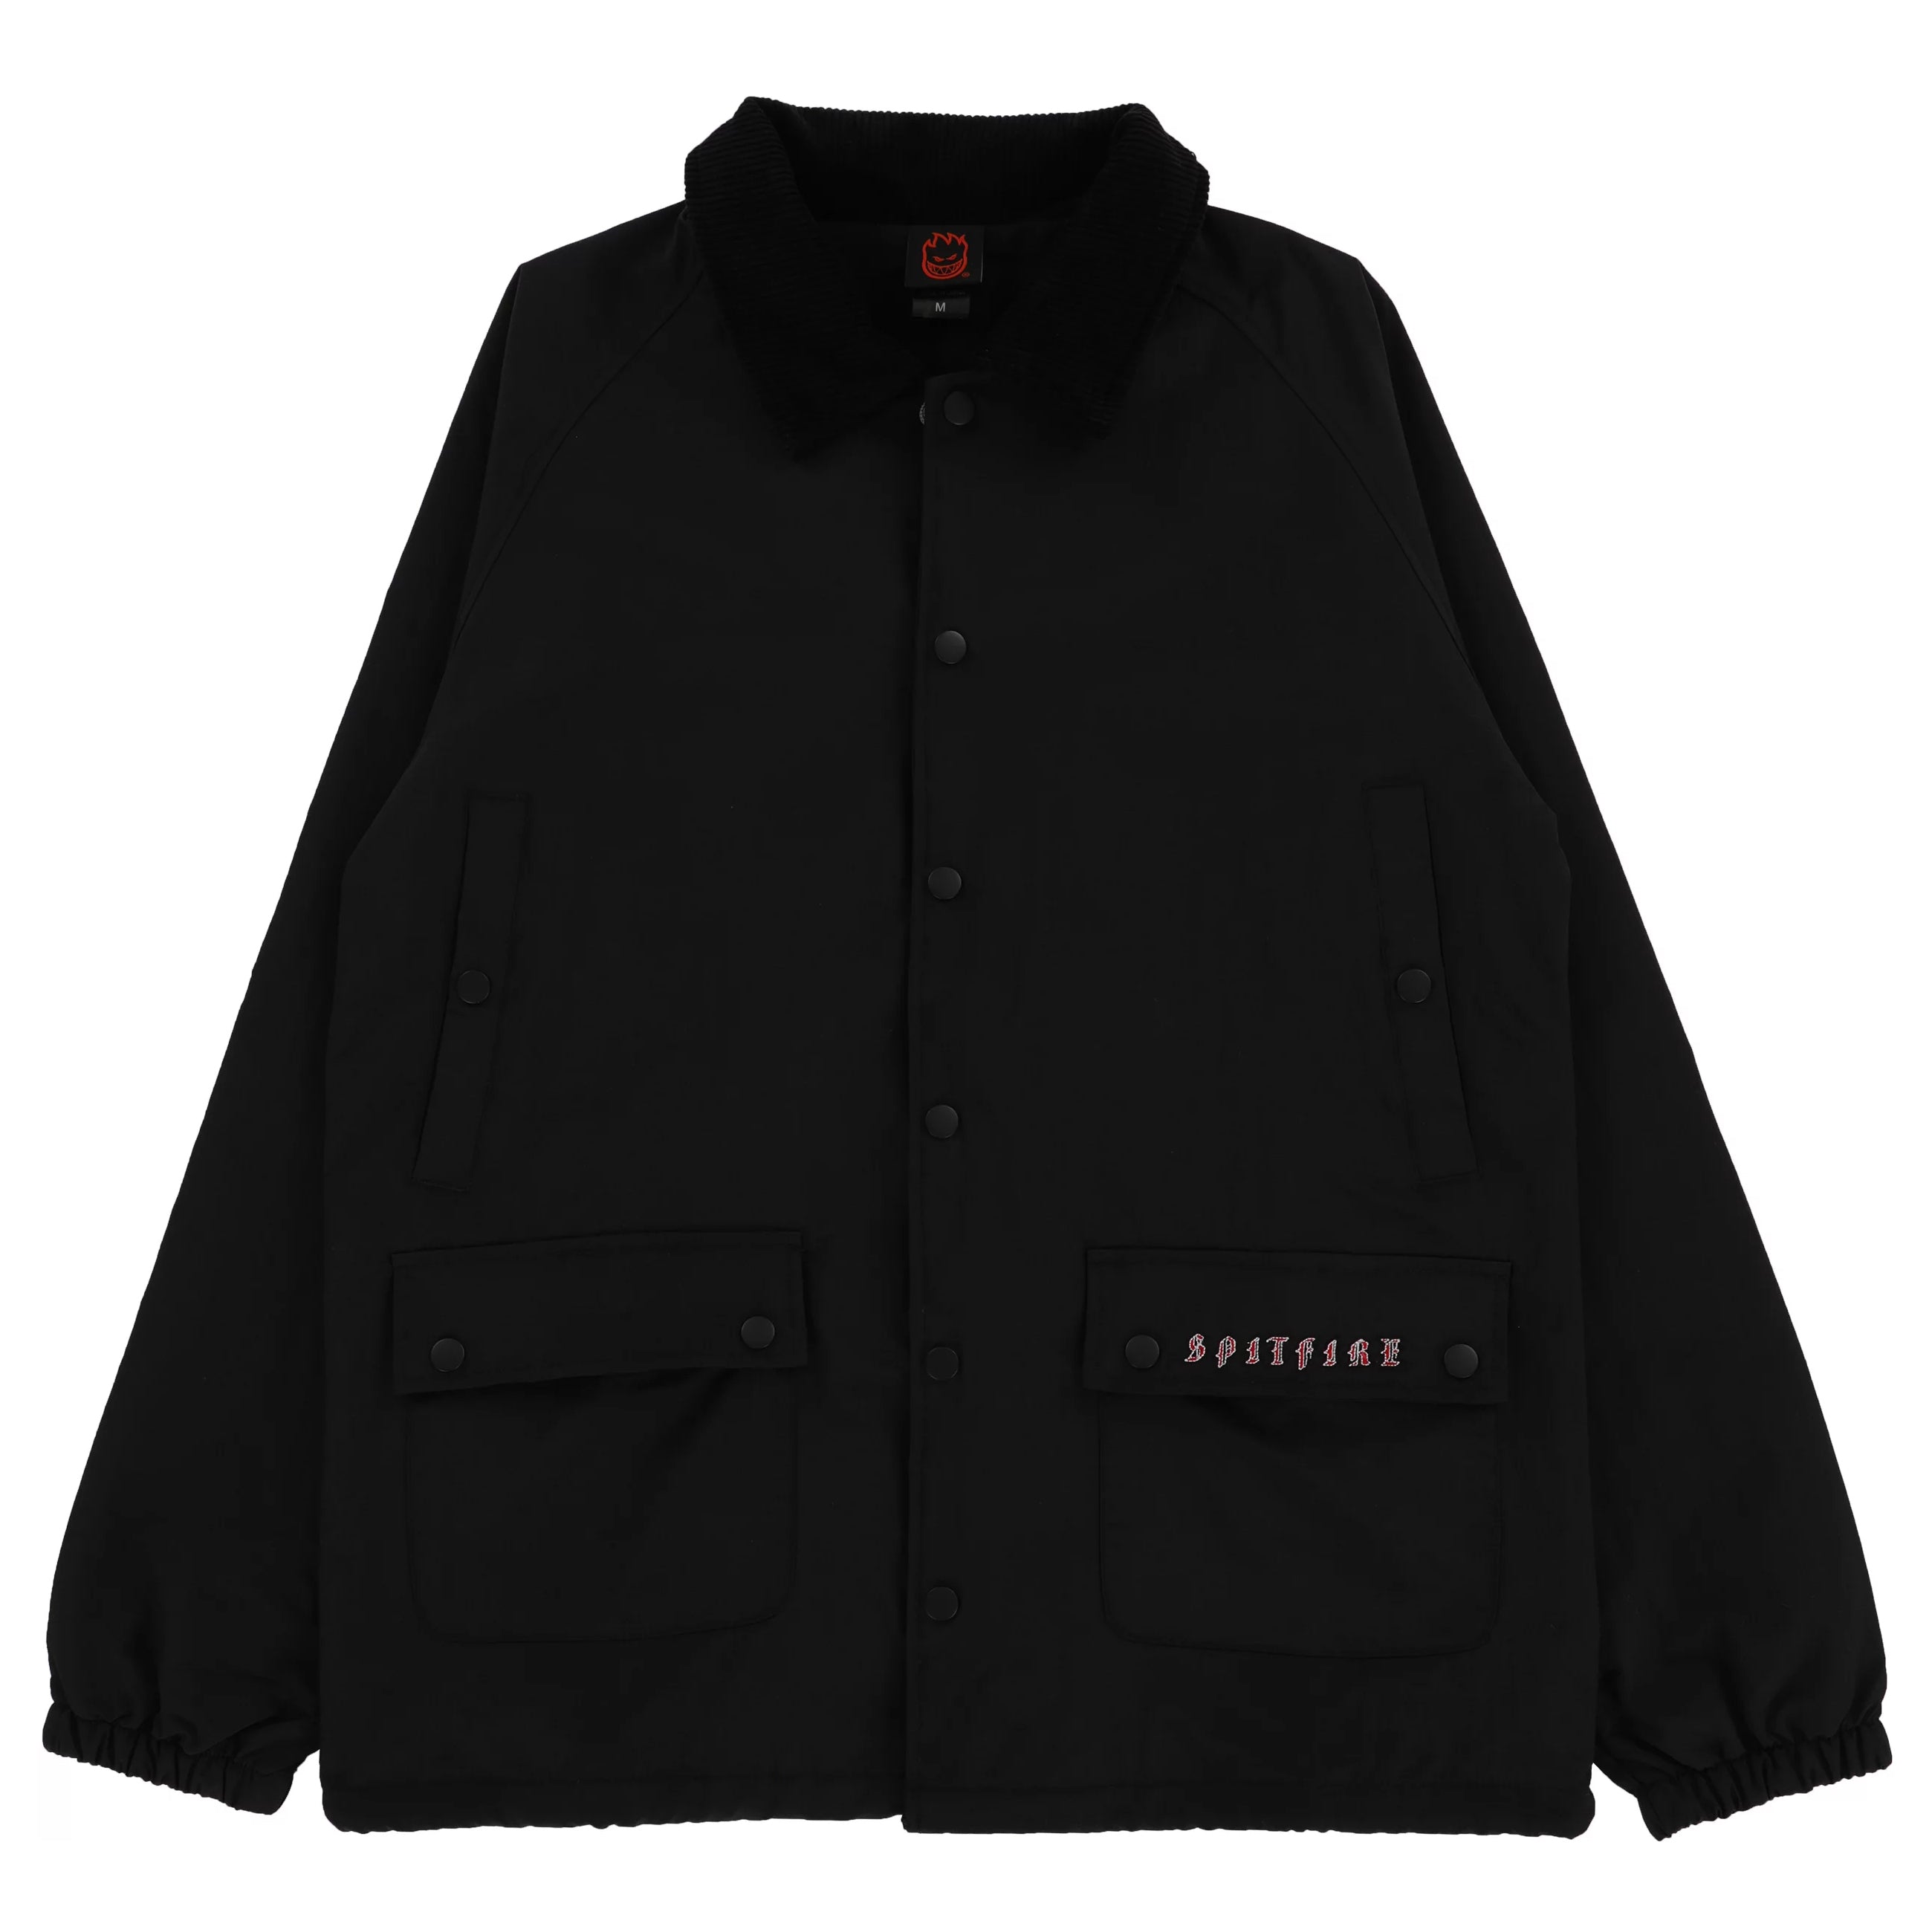 SPITFIRE WHEEL JACKET OLD ENGLISH EMBROIDERED BLACK/RED/WHITE ...